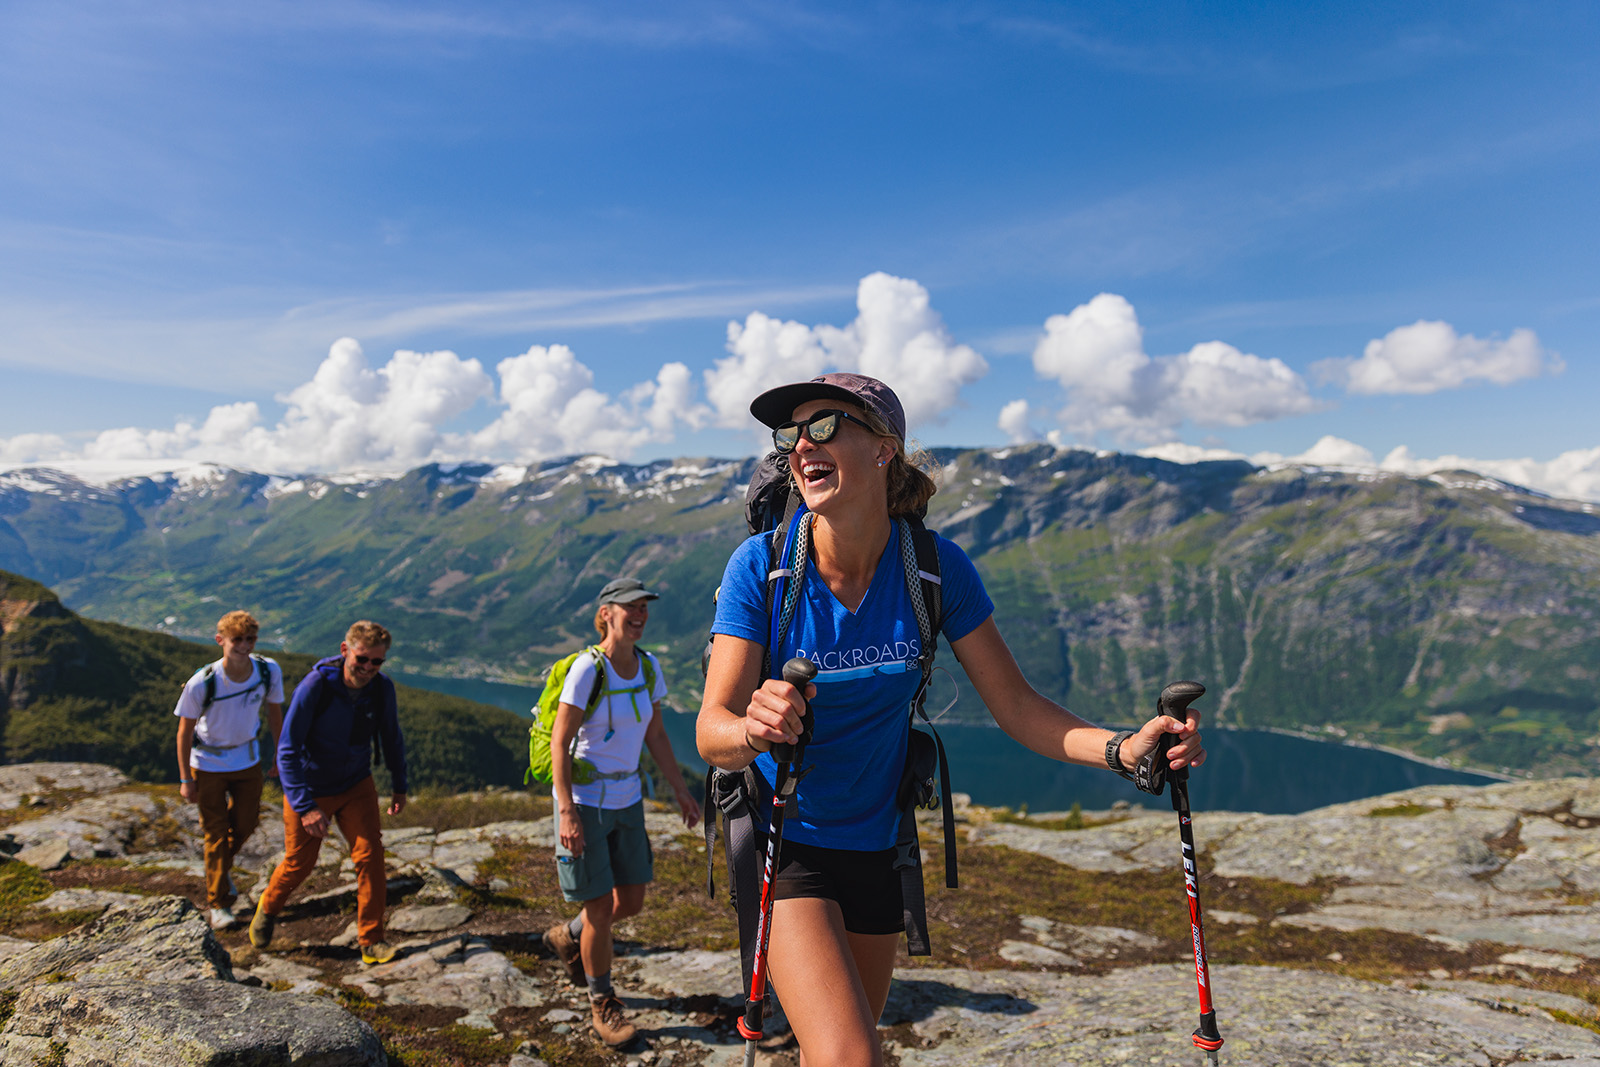 Woman with walking sticks smiling at another group of hikers